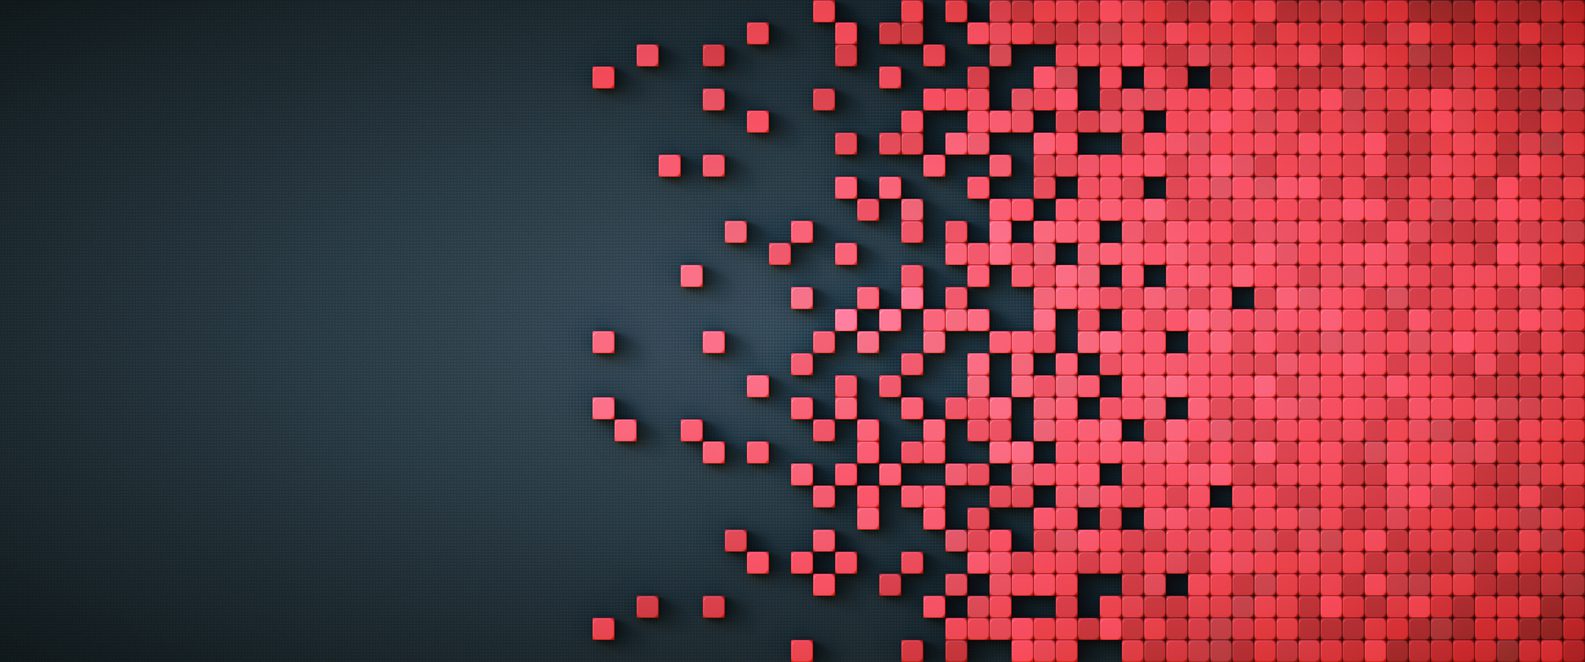 Red cube shapes on a black background representing a modern data stack.